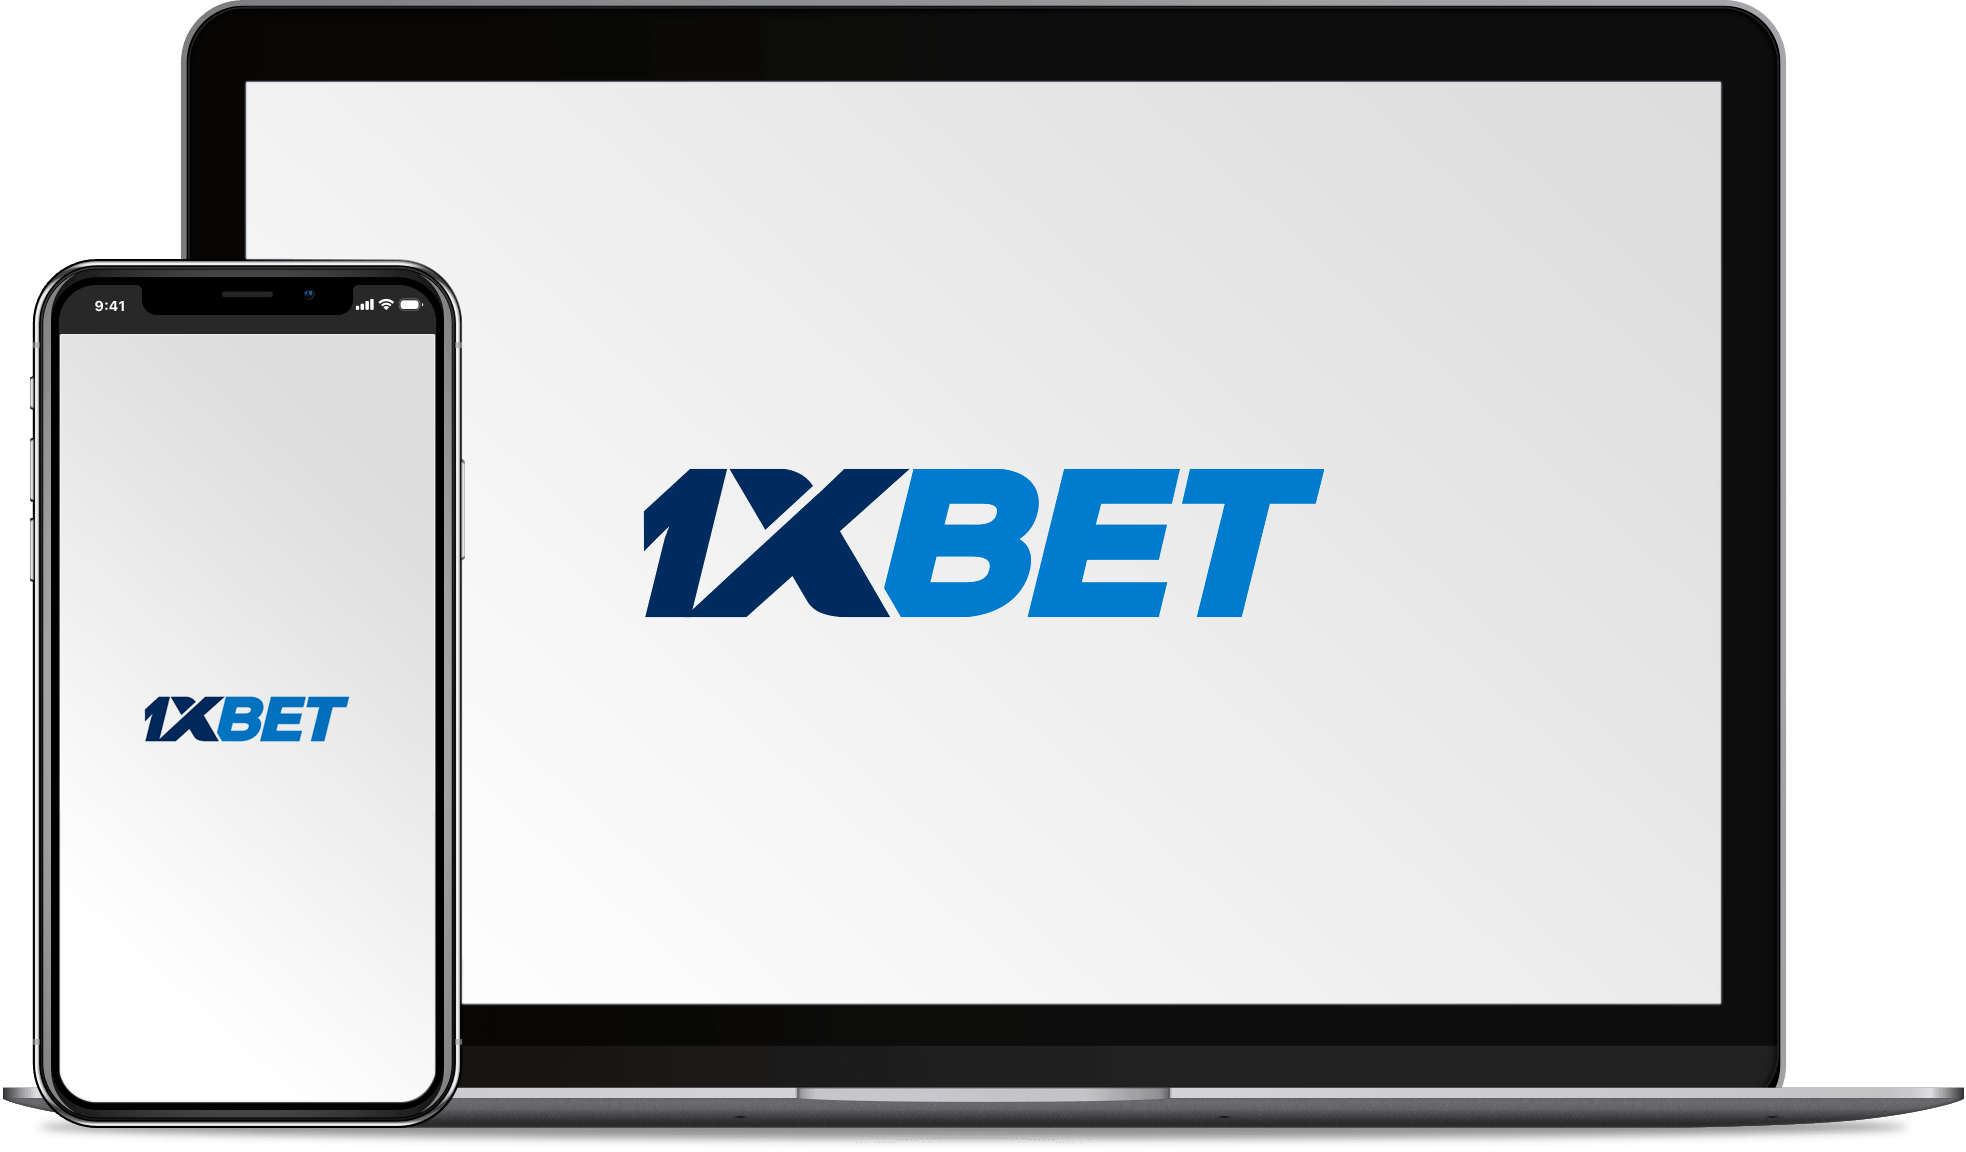 1xbet application mobile